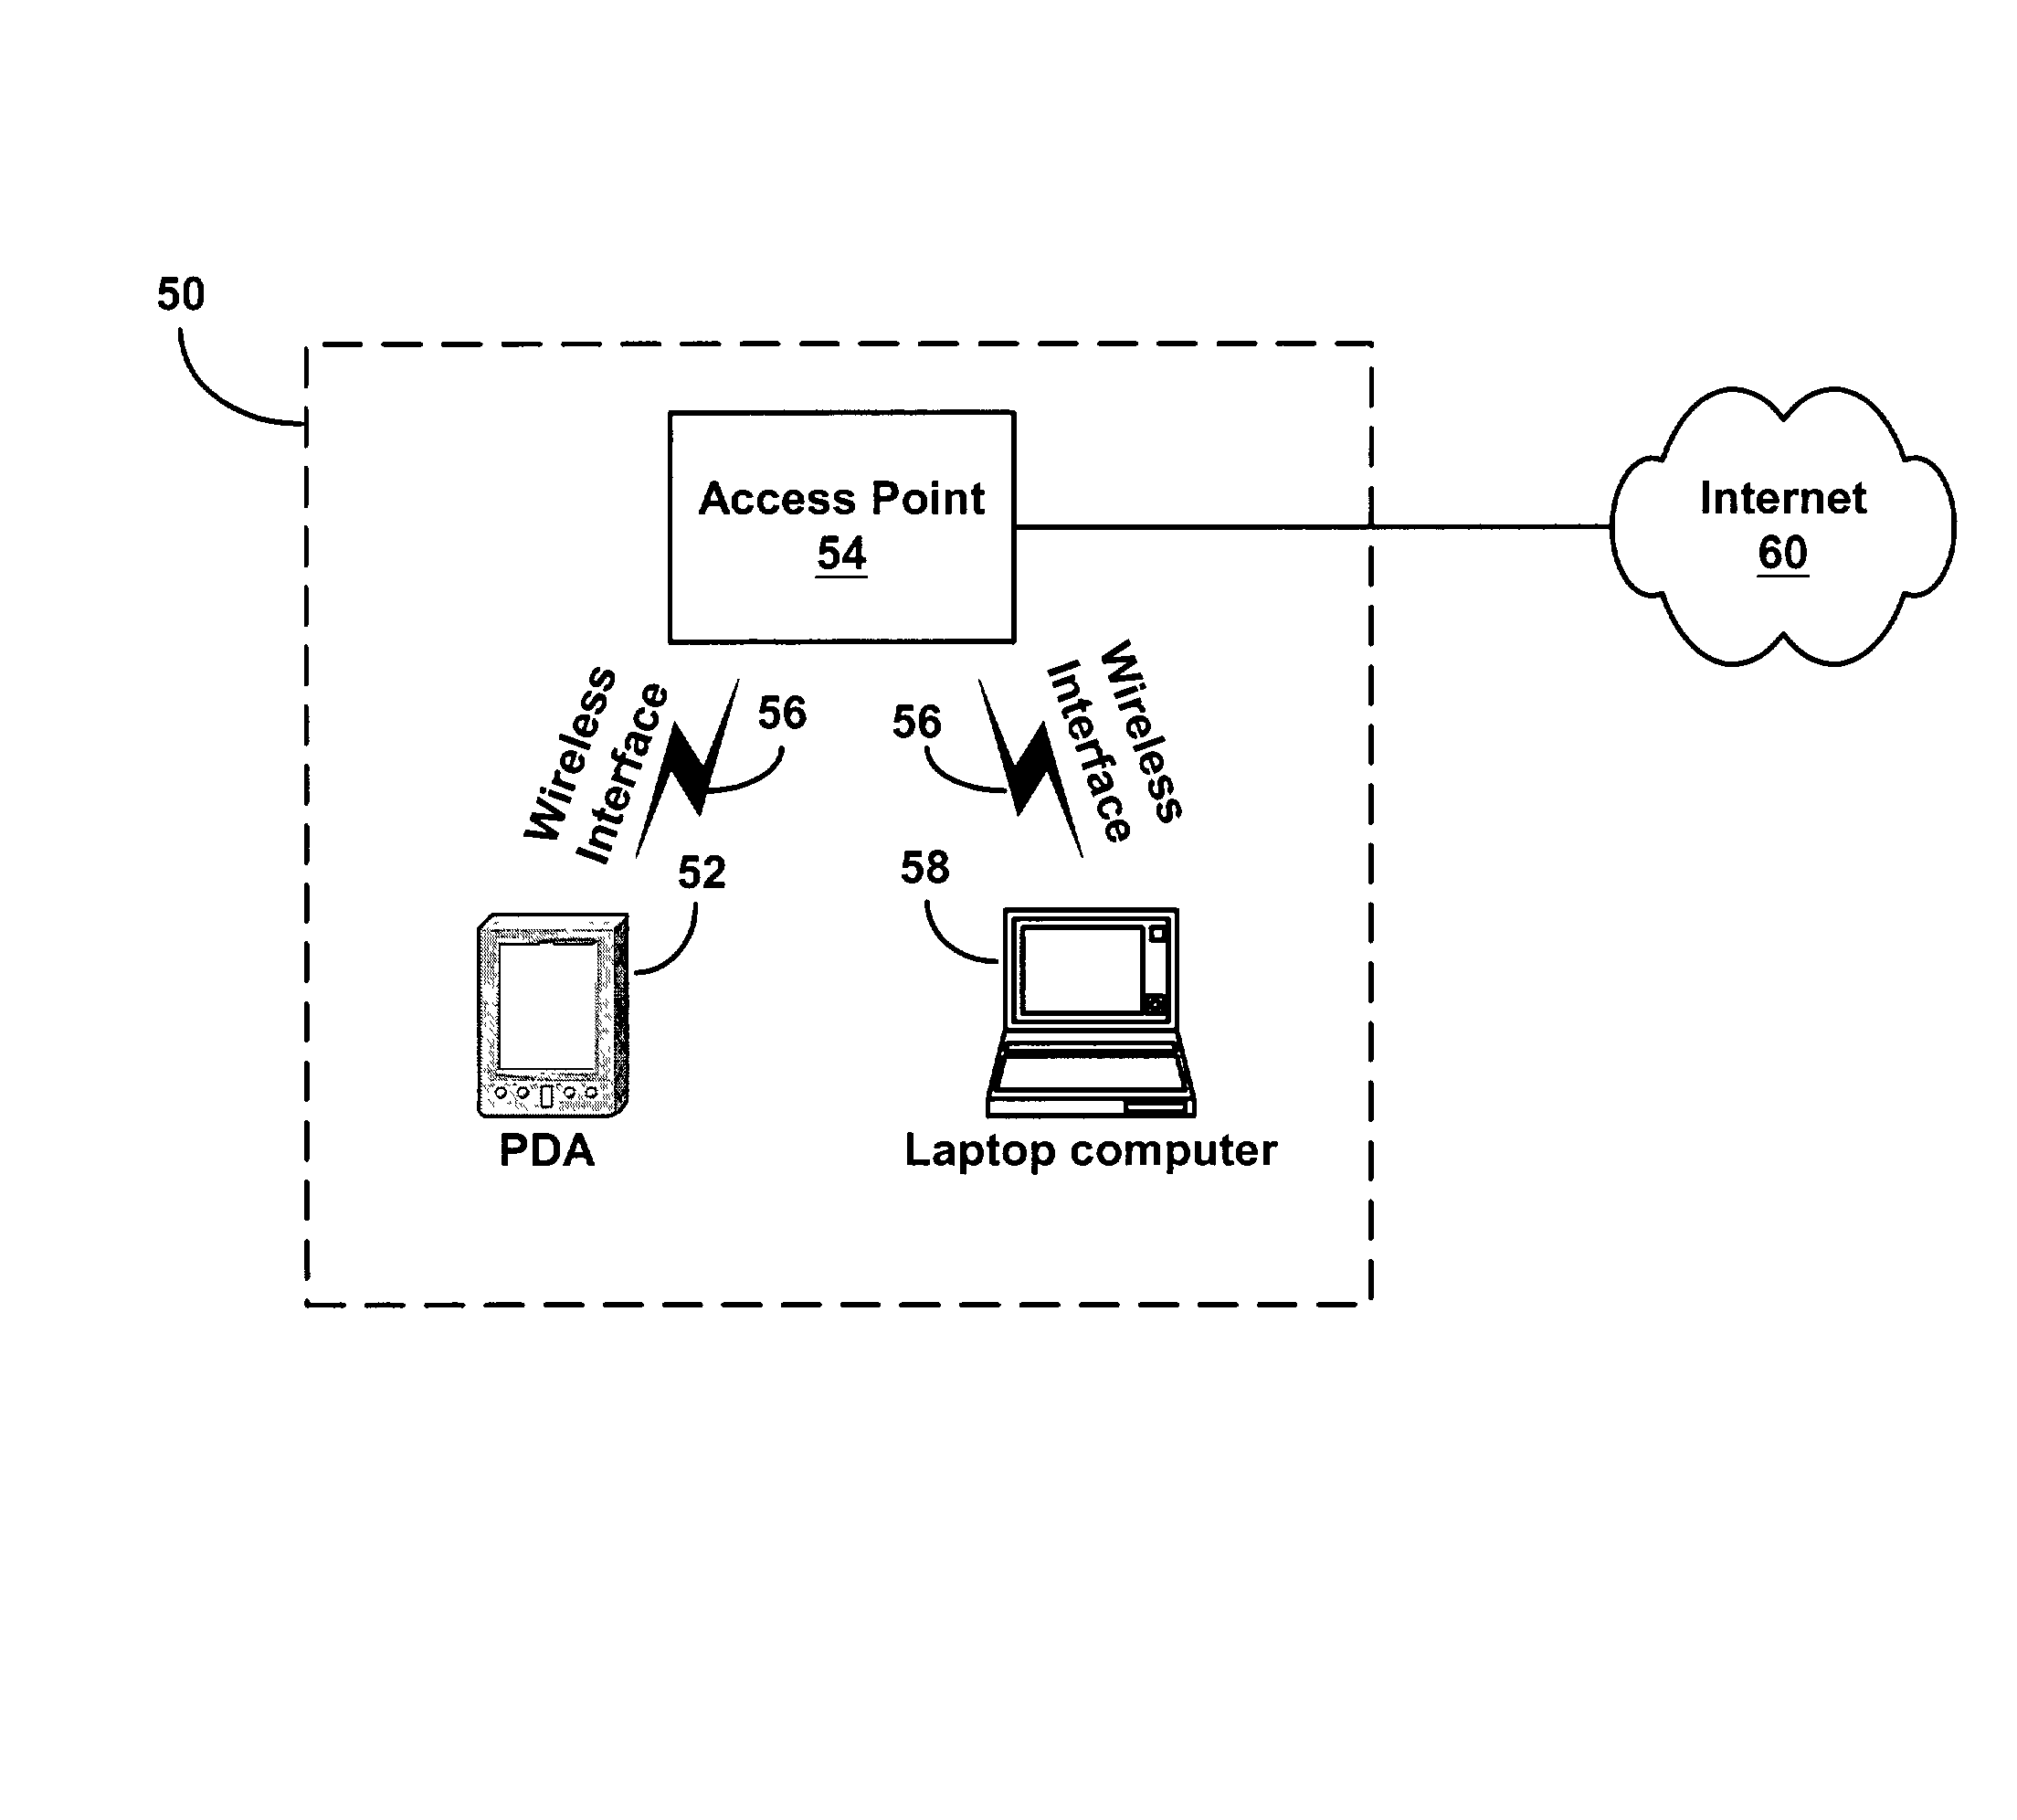 Method for automated security configuration in a wireless network